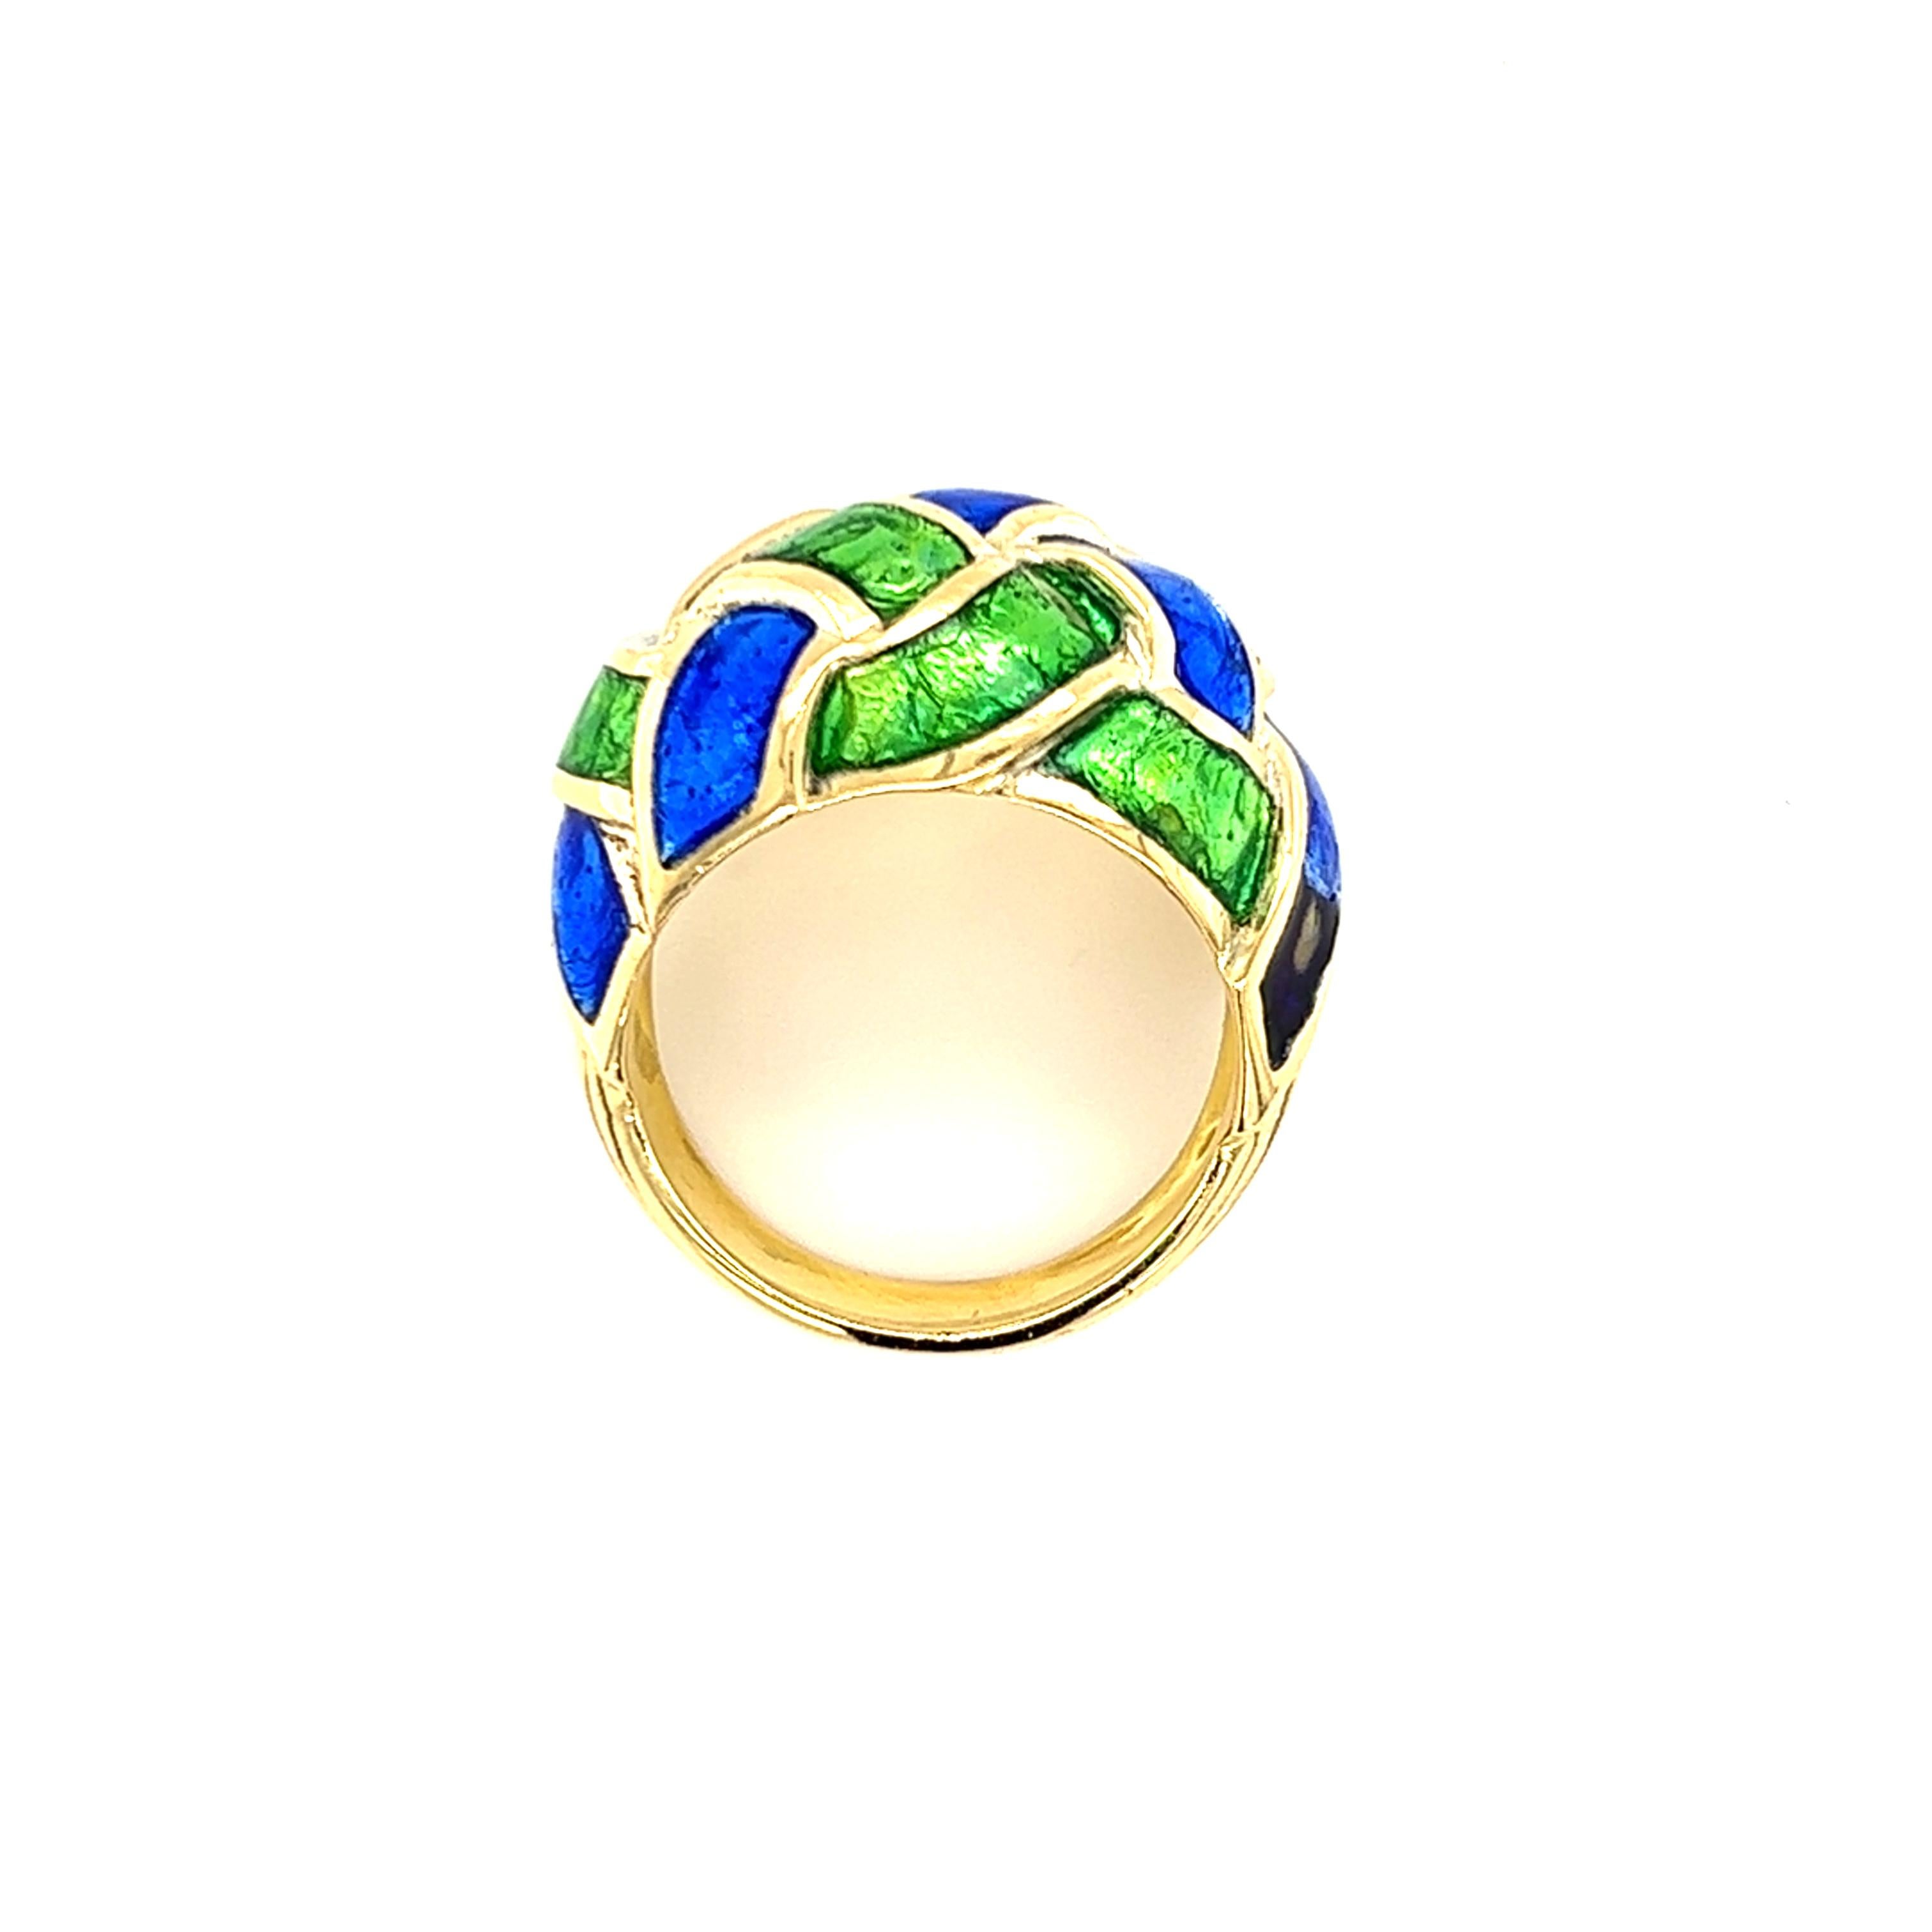 Jean Schlumberger for Tiffany & Co. Enamel Woven Knot Dome Ring 3